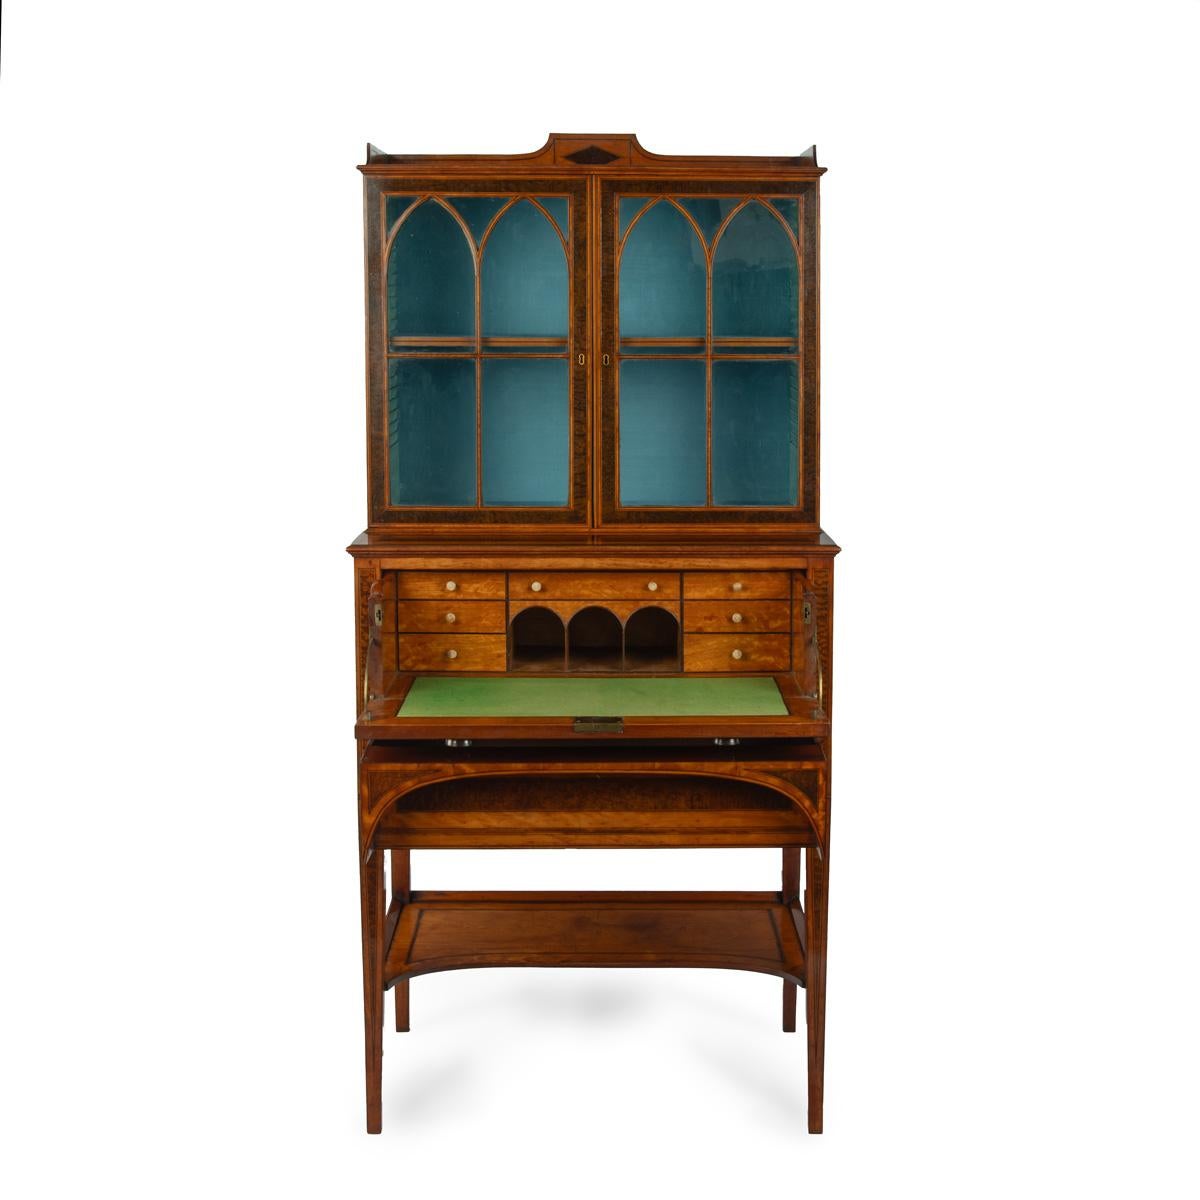 A fine late George III satinwood and snakewood secretaire cabinet, attributed to George Simson of London, of rectangular form, the upper section with a pair of glazed doors with fine gothic astragal glazing bars enclosing a single shelf, above a